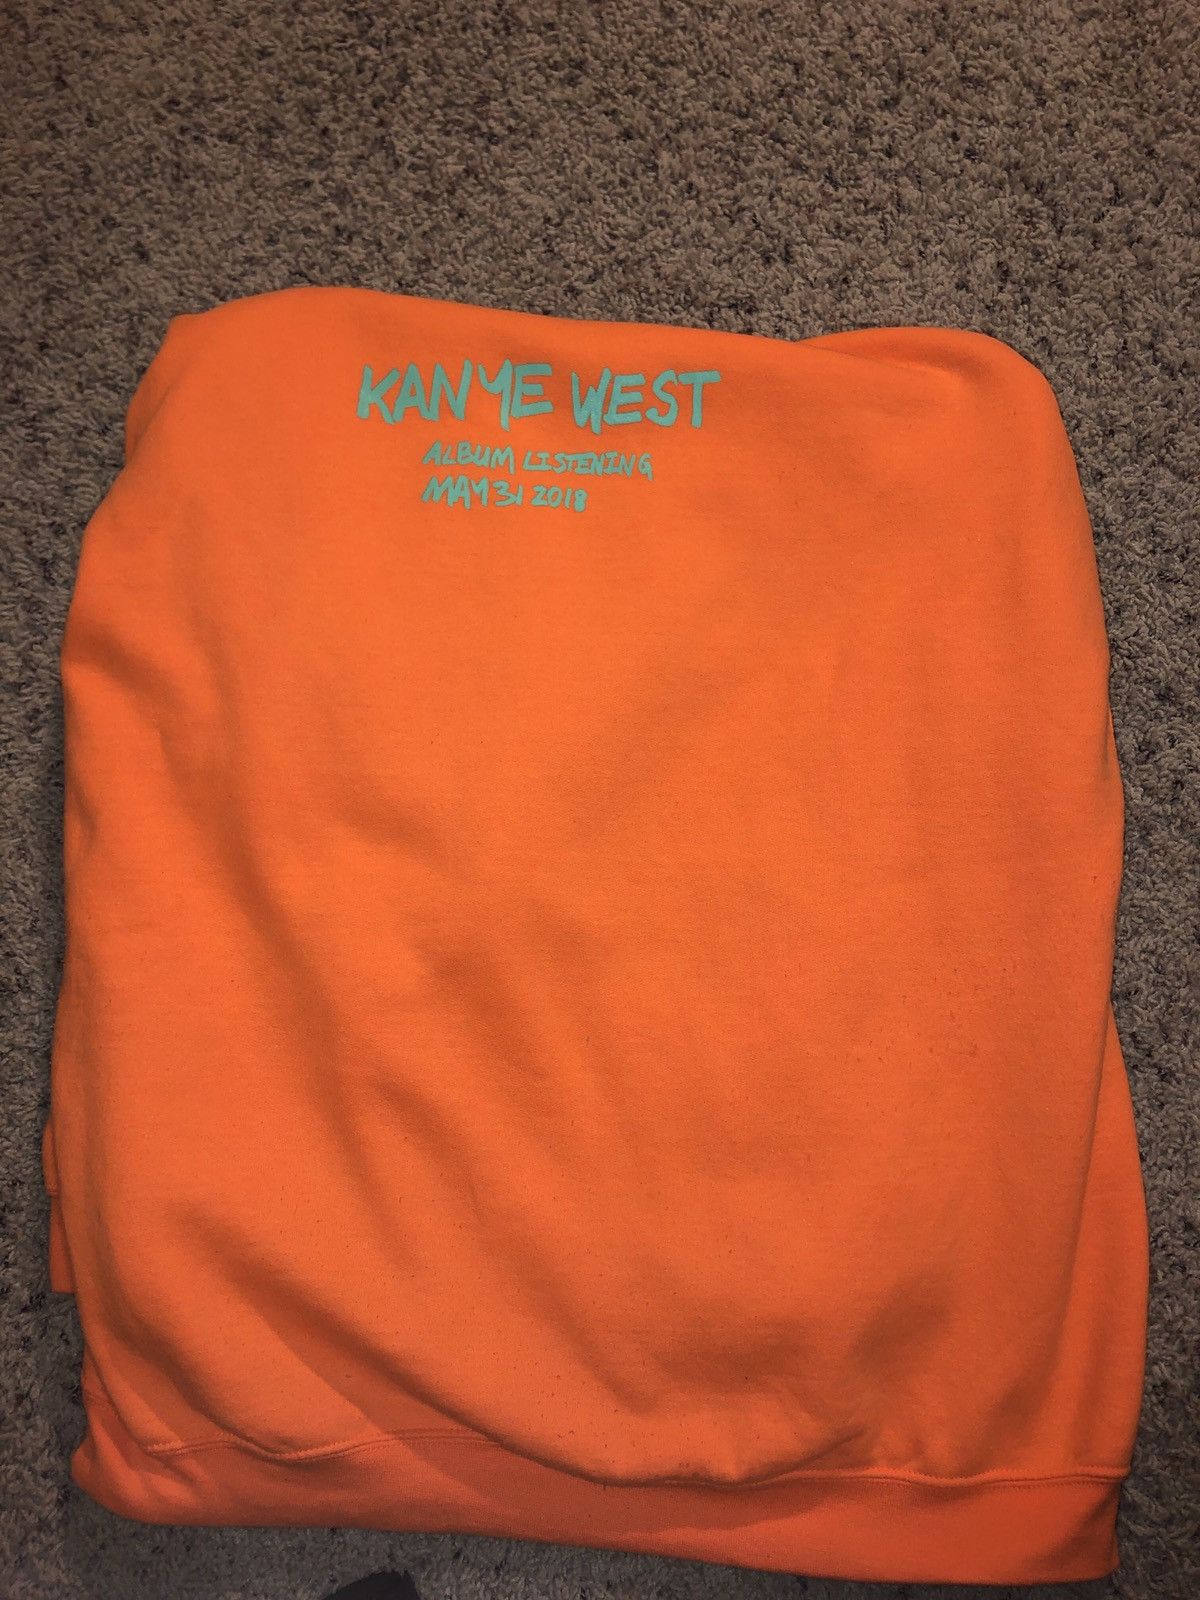 Adidas Kanye West Wyoming Listening Party Hoodie Size US XXL / EU 58 / 5 - 2 Preview